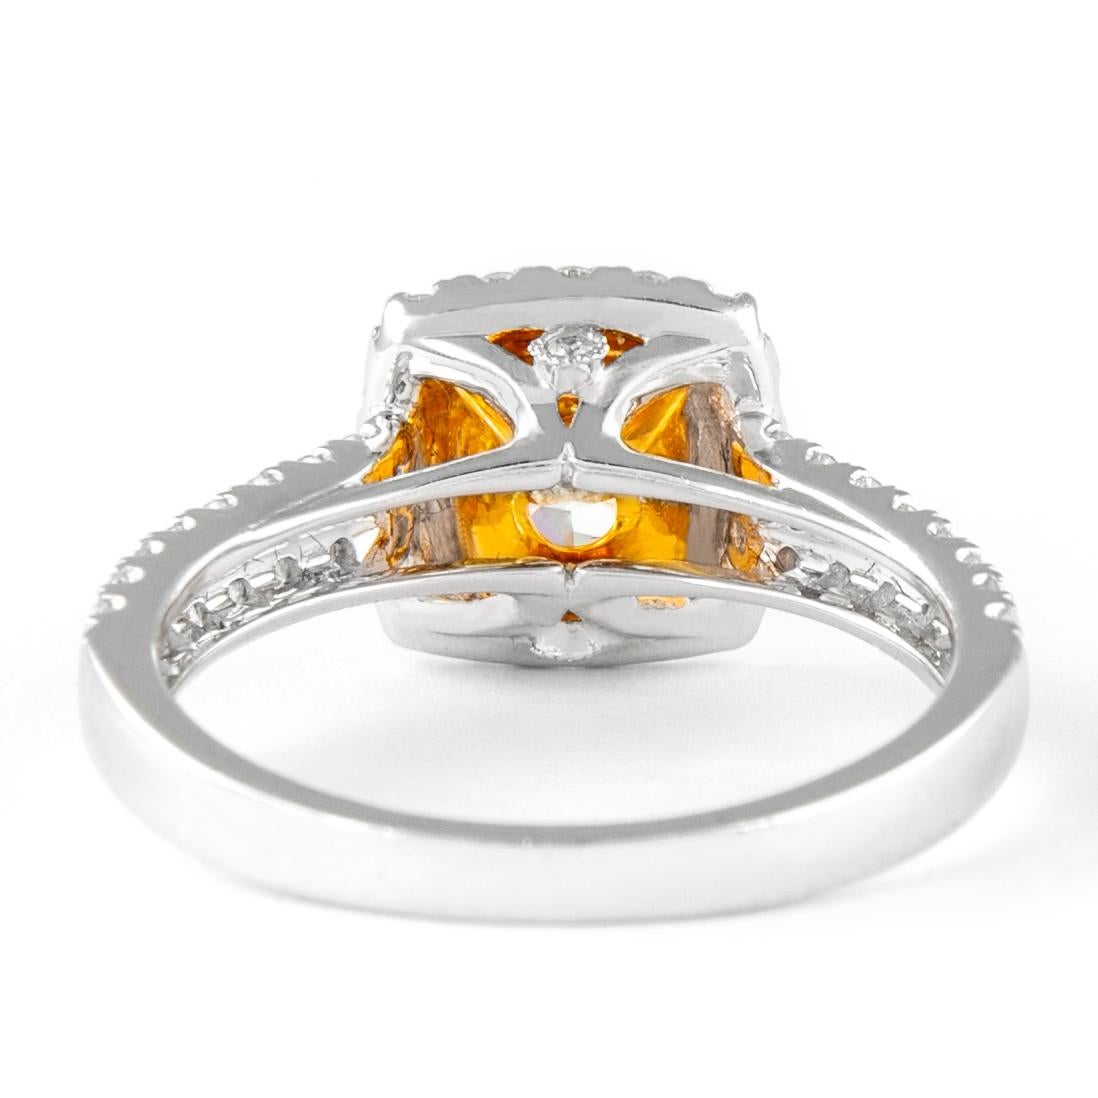 Cushion Cut Alexander 1.90ctt Fancy Yellow Cushion VS1 Diamond with Halo Ring 18k Two Tone For Sale